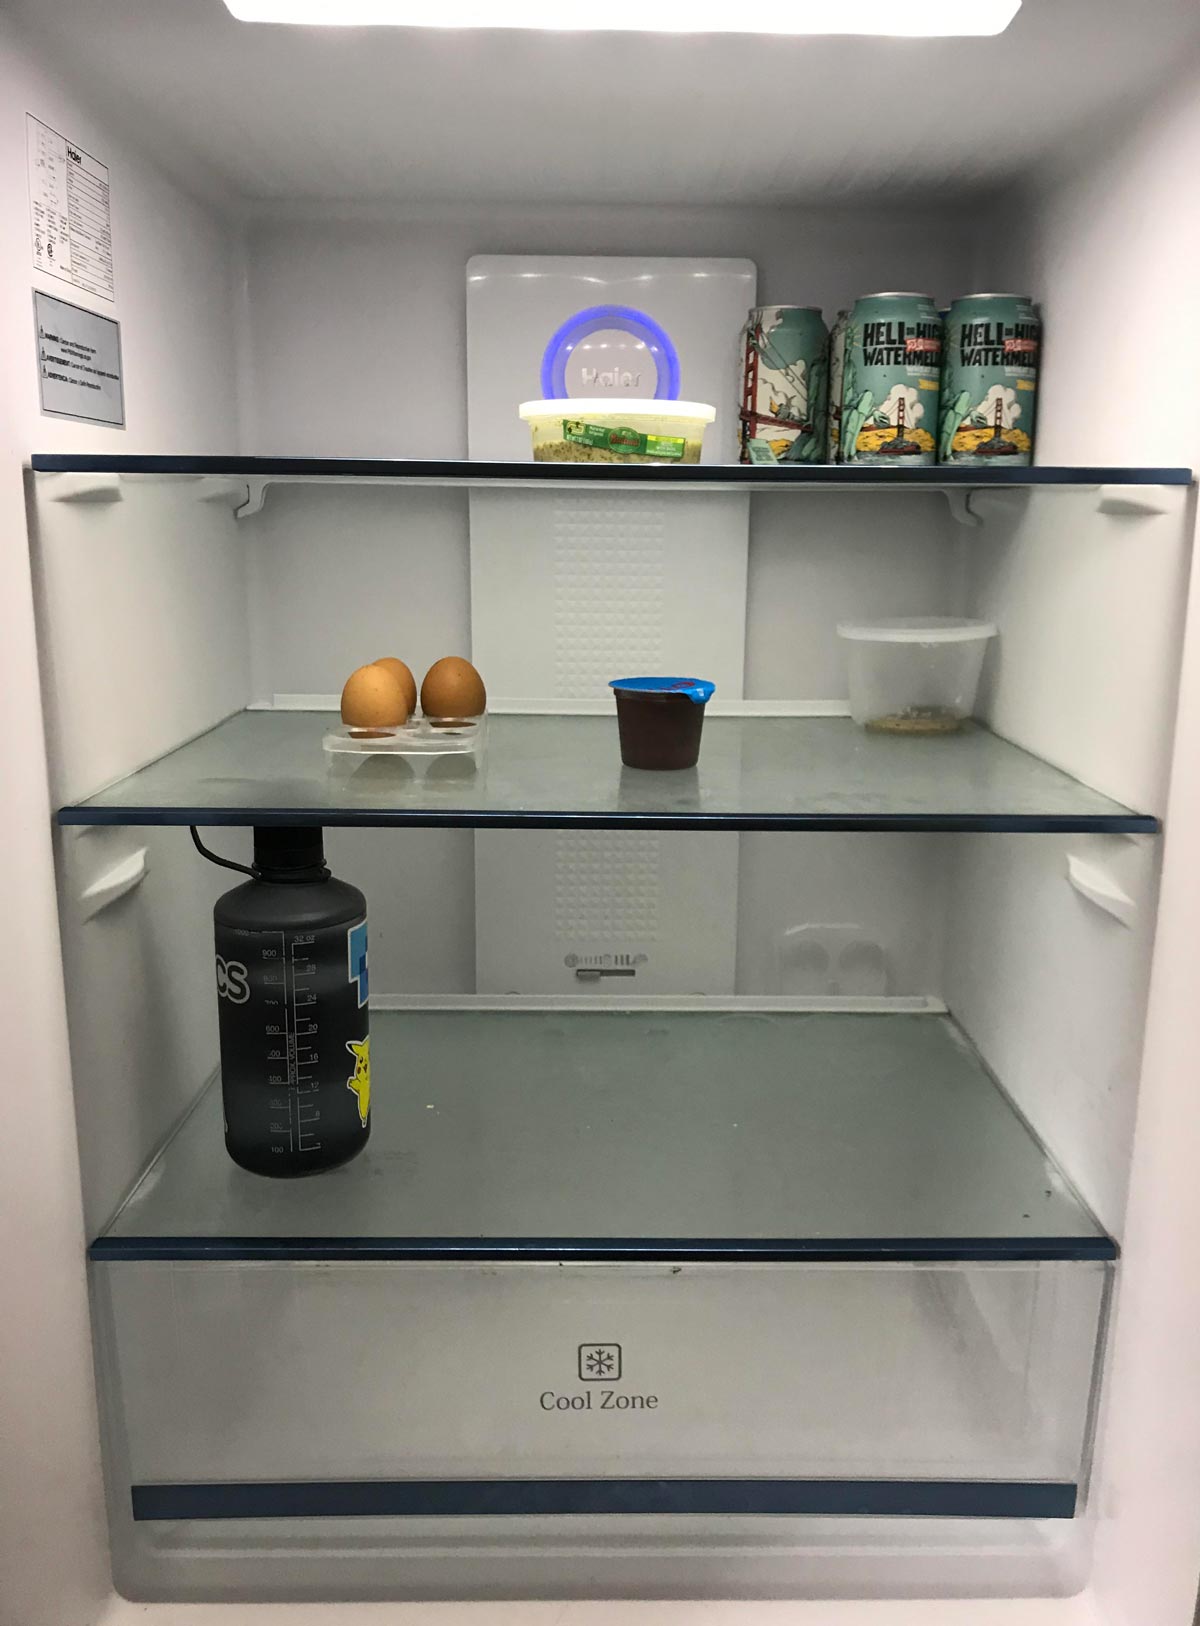 Today I opened my 29 year old boyfriend’s fridge. This is consistently what his fridge looks like. I fear for males everywhere. We must help them, but can they be helped?